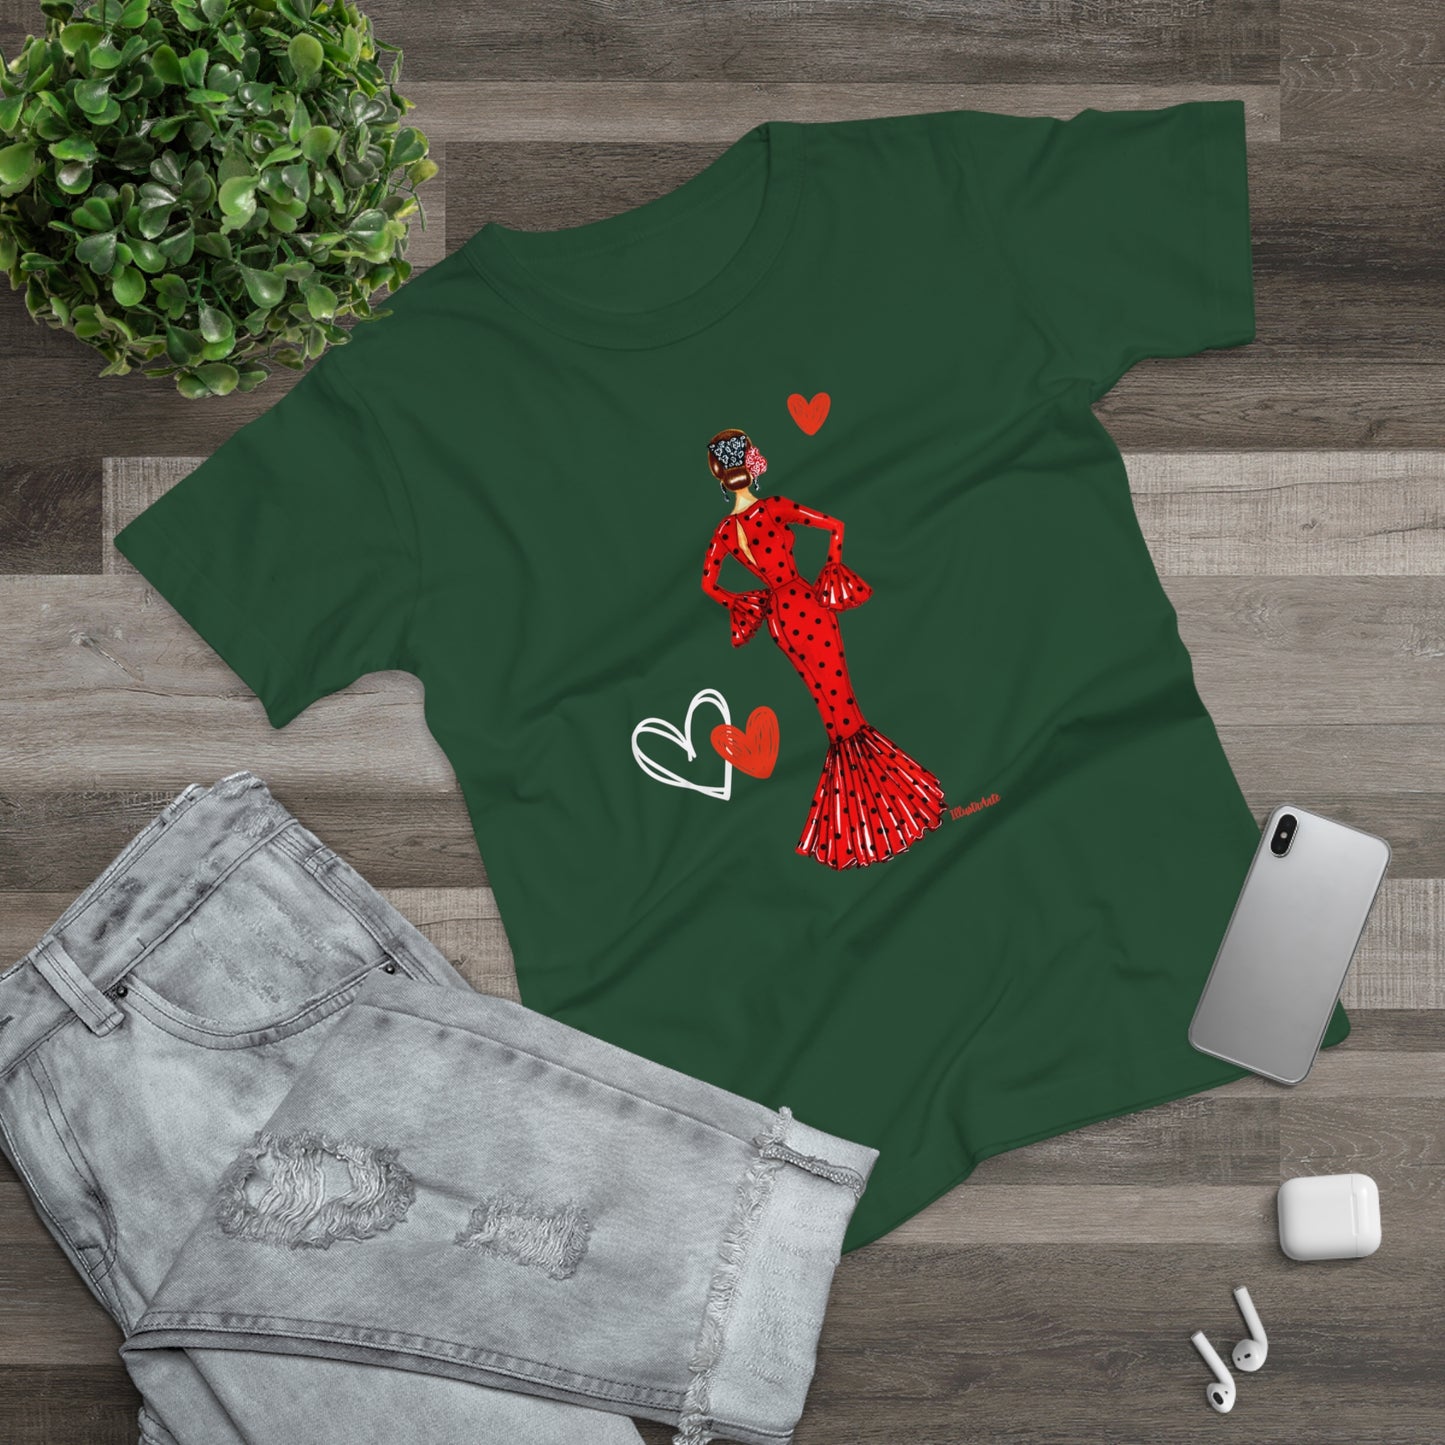 a green t - shirt with a picture of a woman in a red dress